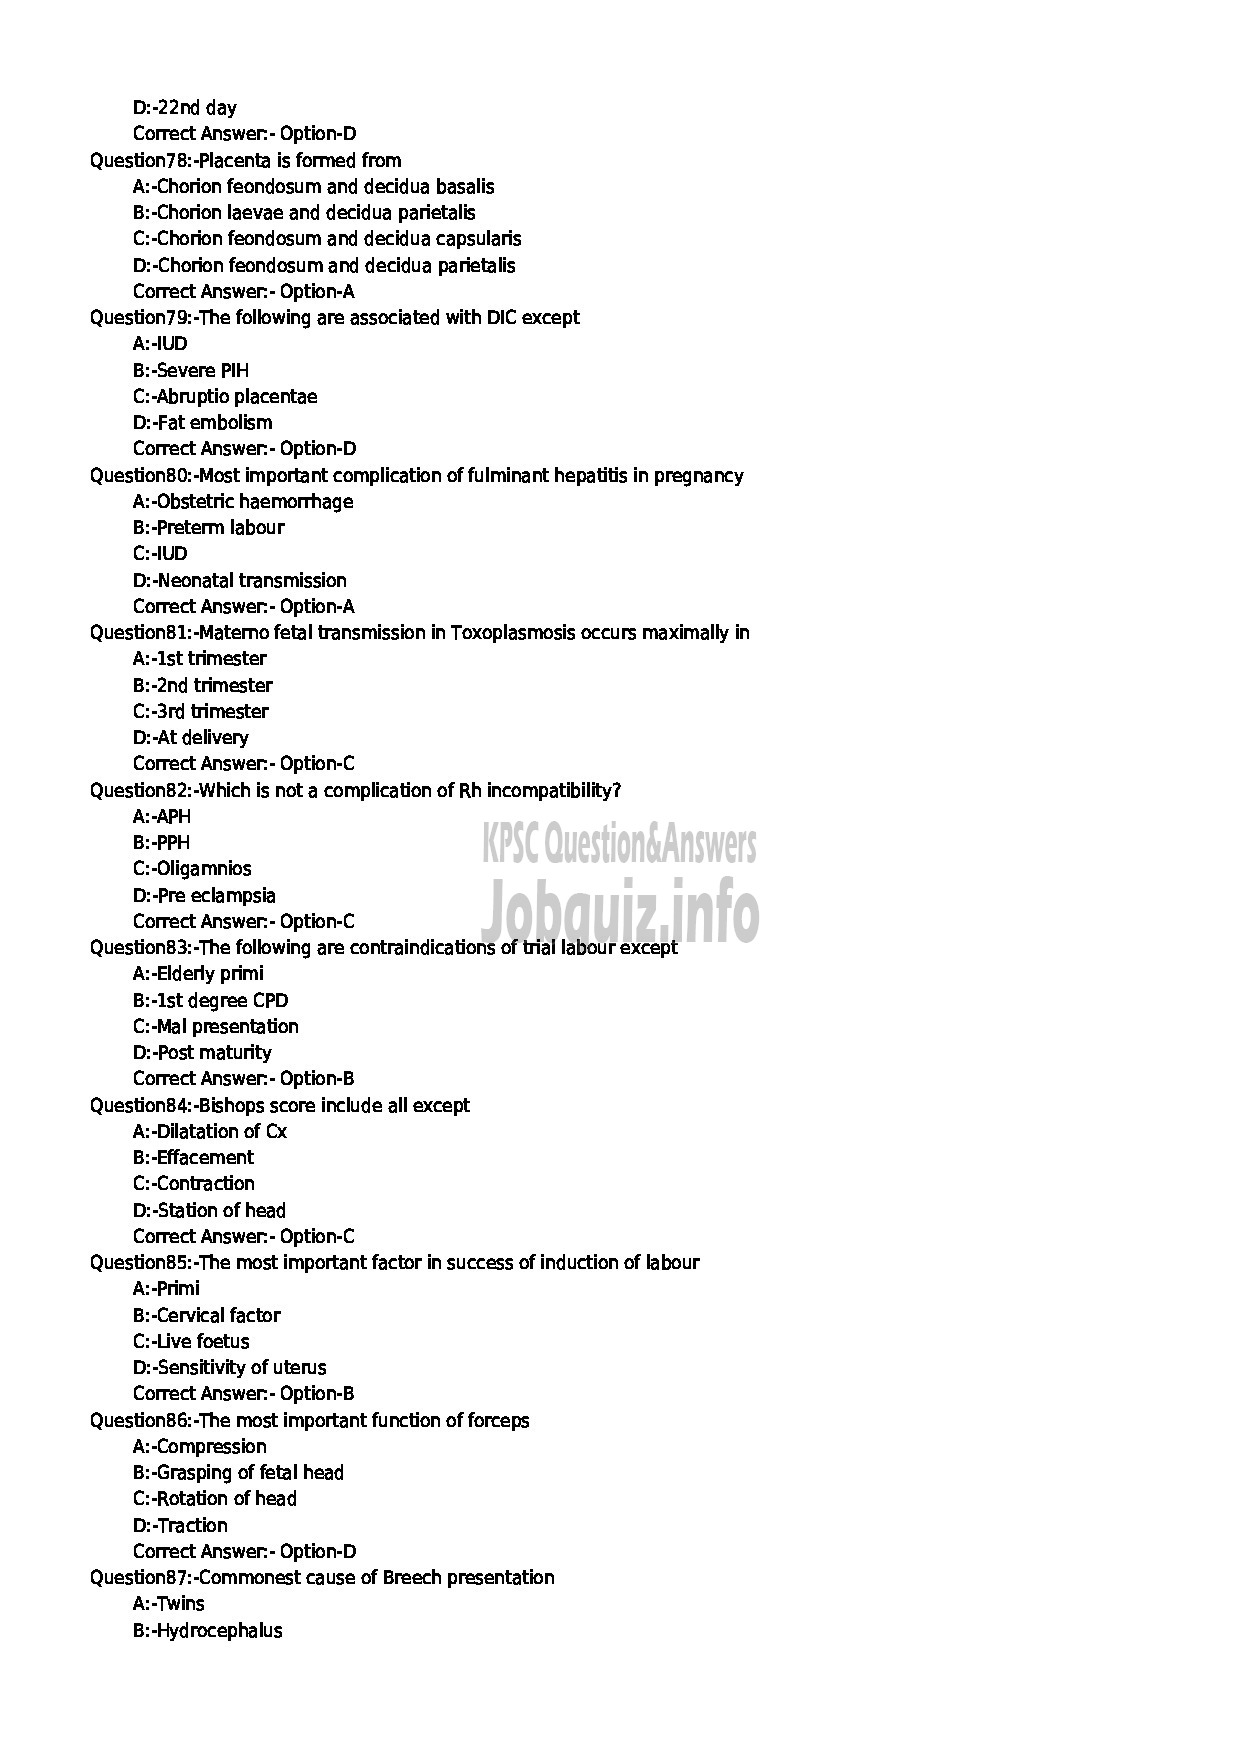 Kerala PSC Question Paper - SENIOR LECTURER IN OBTETRICS AND GYNAECOLOGY MEDICAL EDUCATION-9